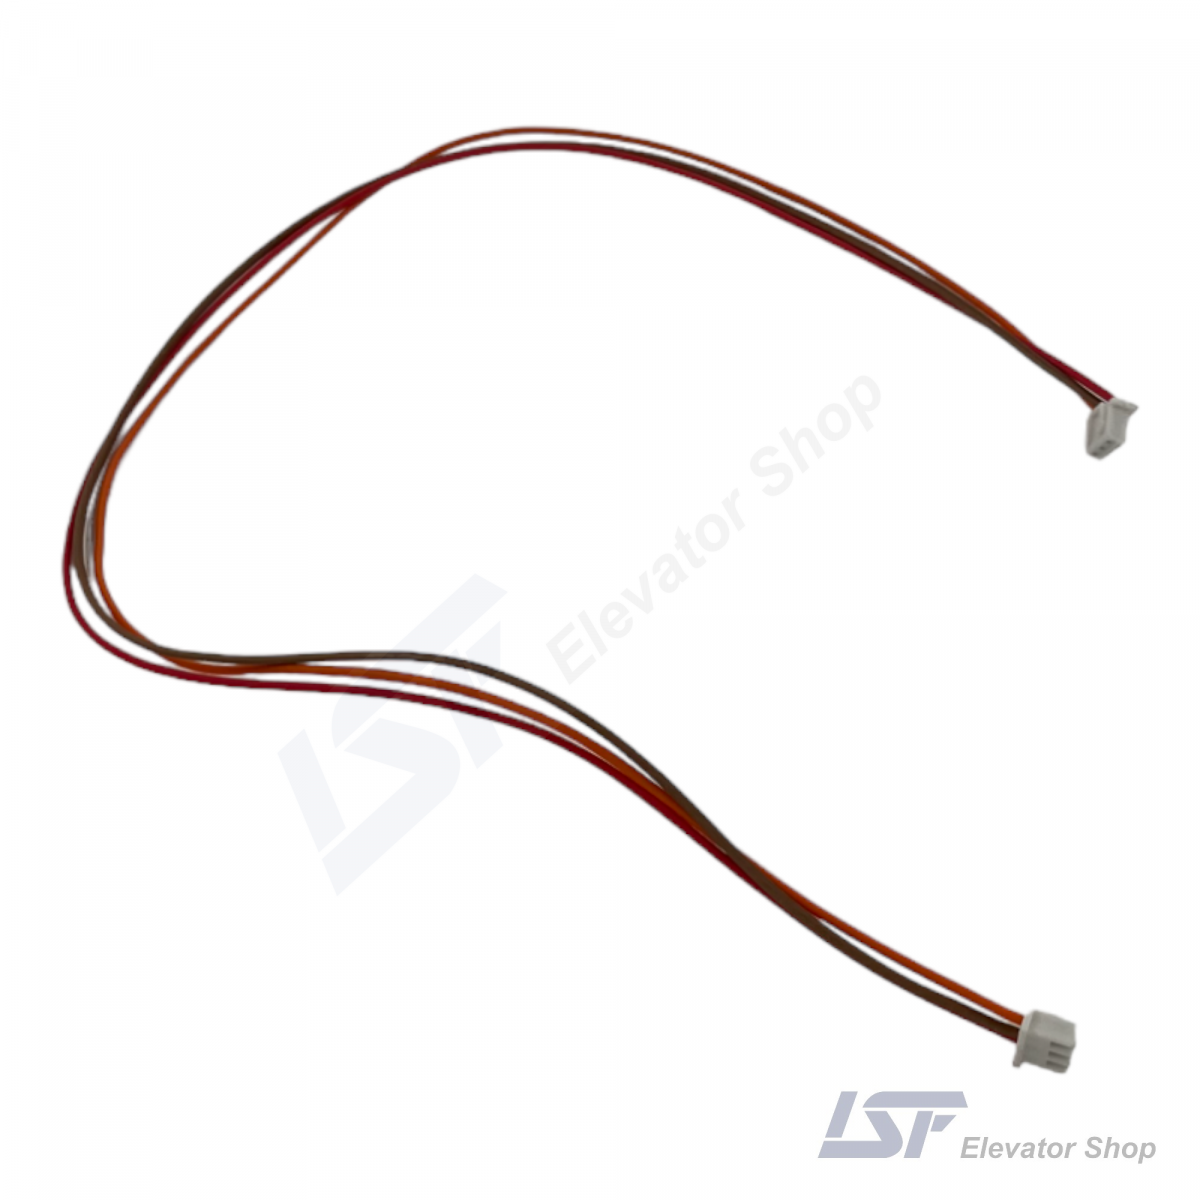 Arkel KBL-BT2 Button Cable 50cm (Two End With Female Connectors)